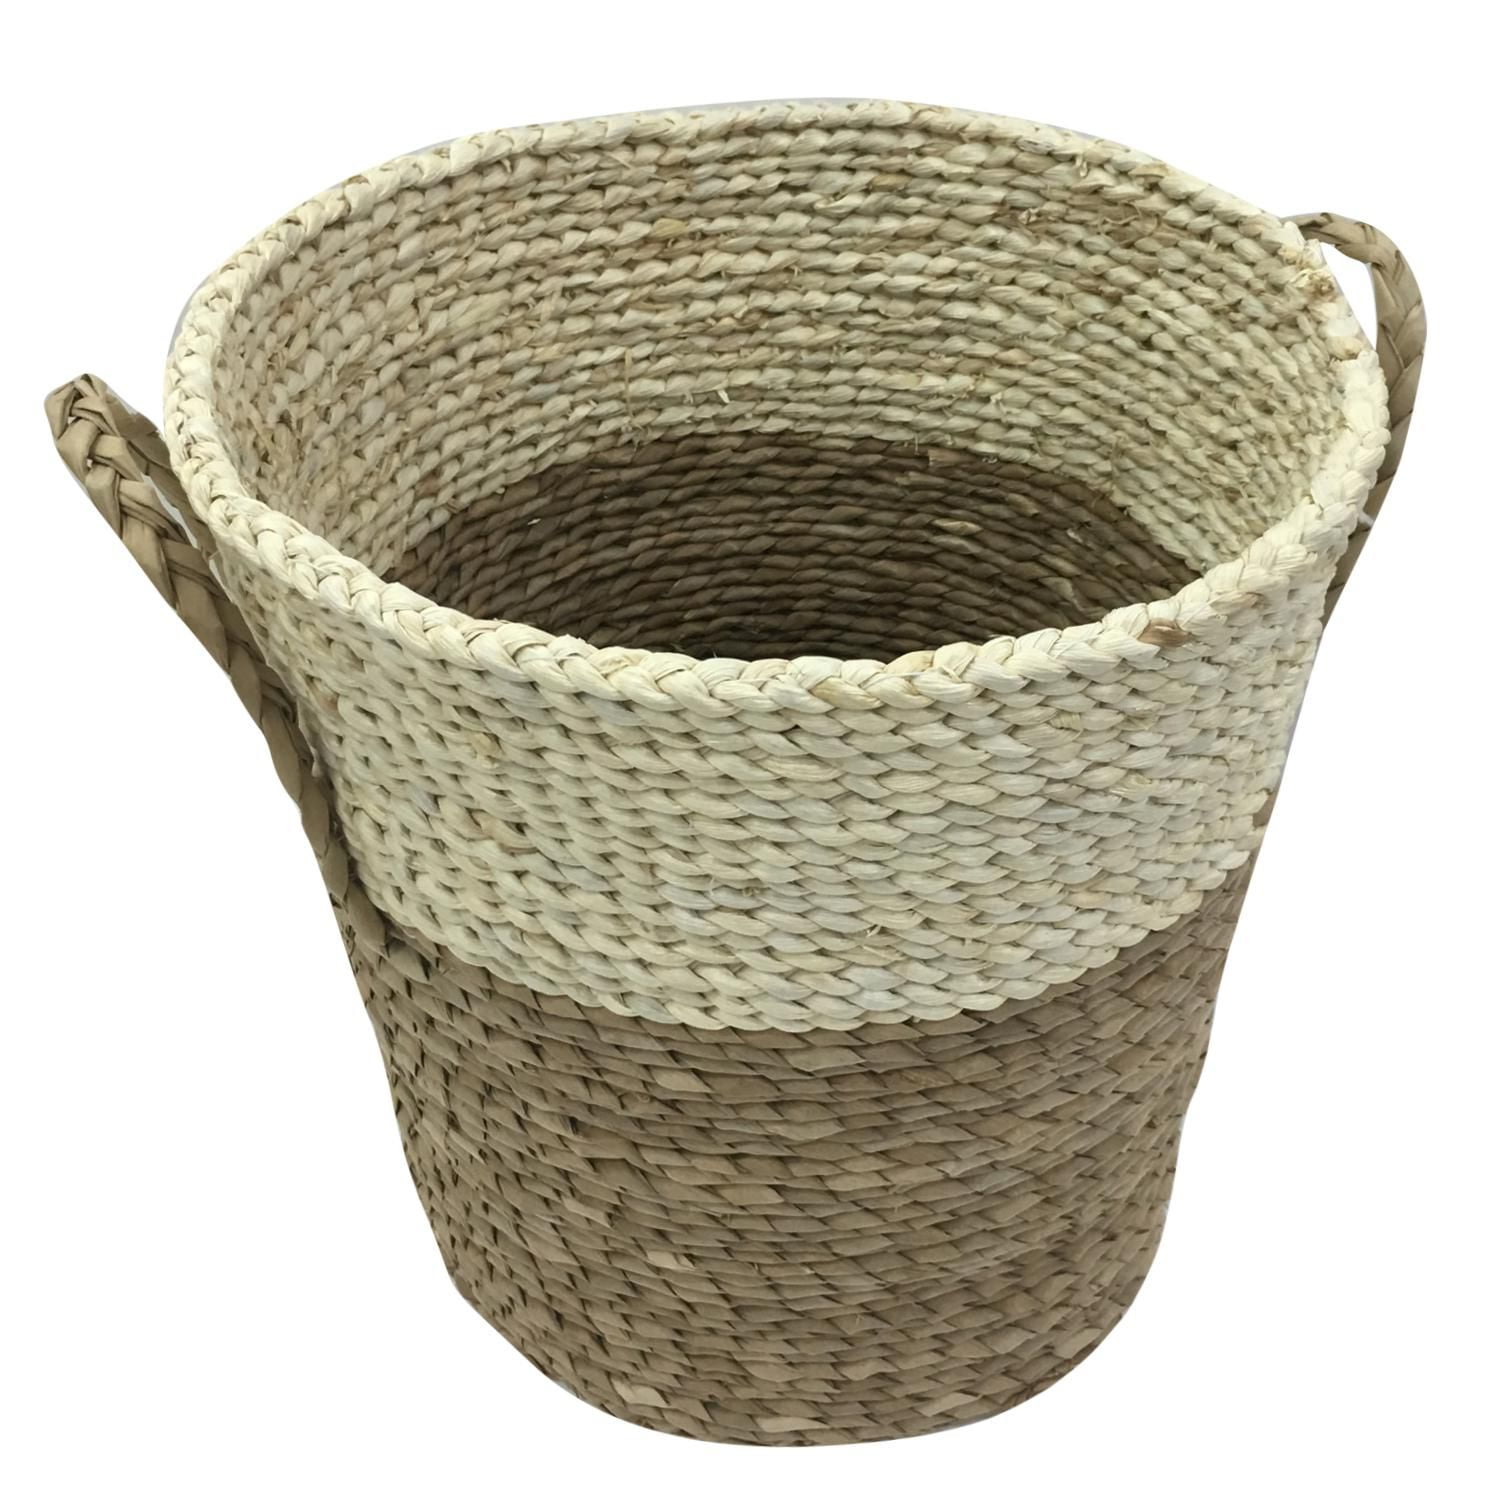 Wholesale wicker craft fish basket to Organize and Tidy Up Your Home 